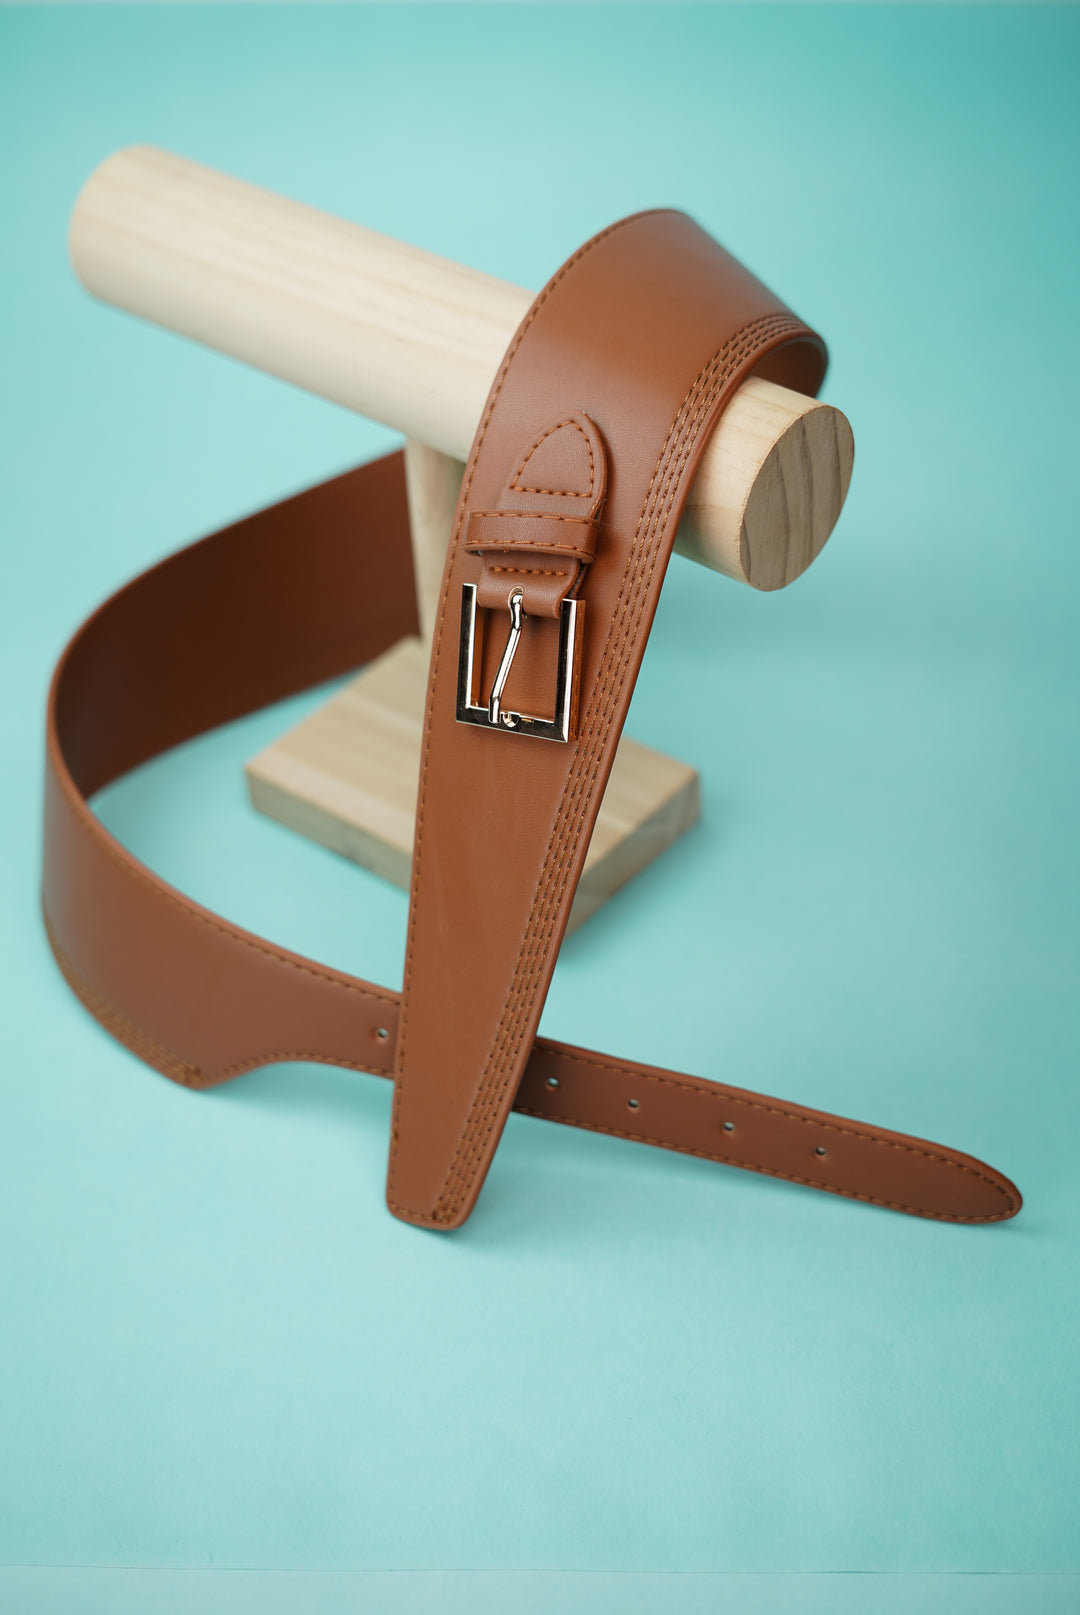 High-quality women's leather belt with stylish details